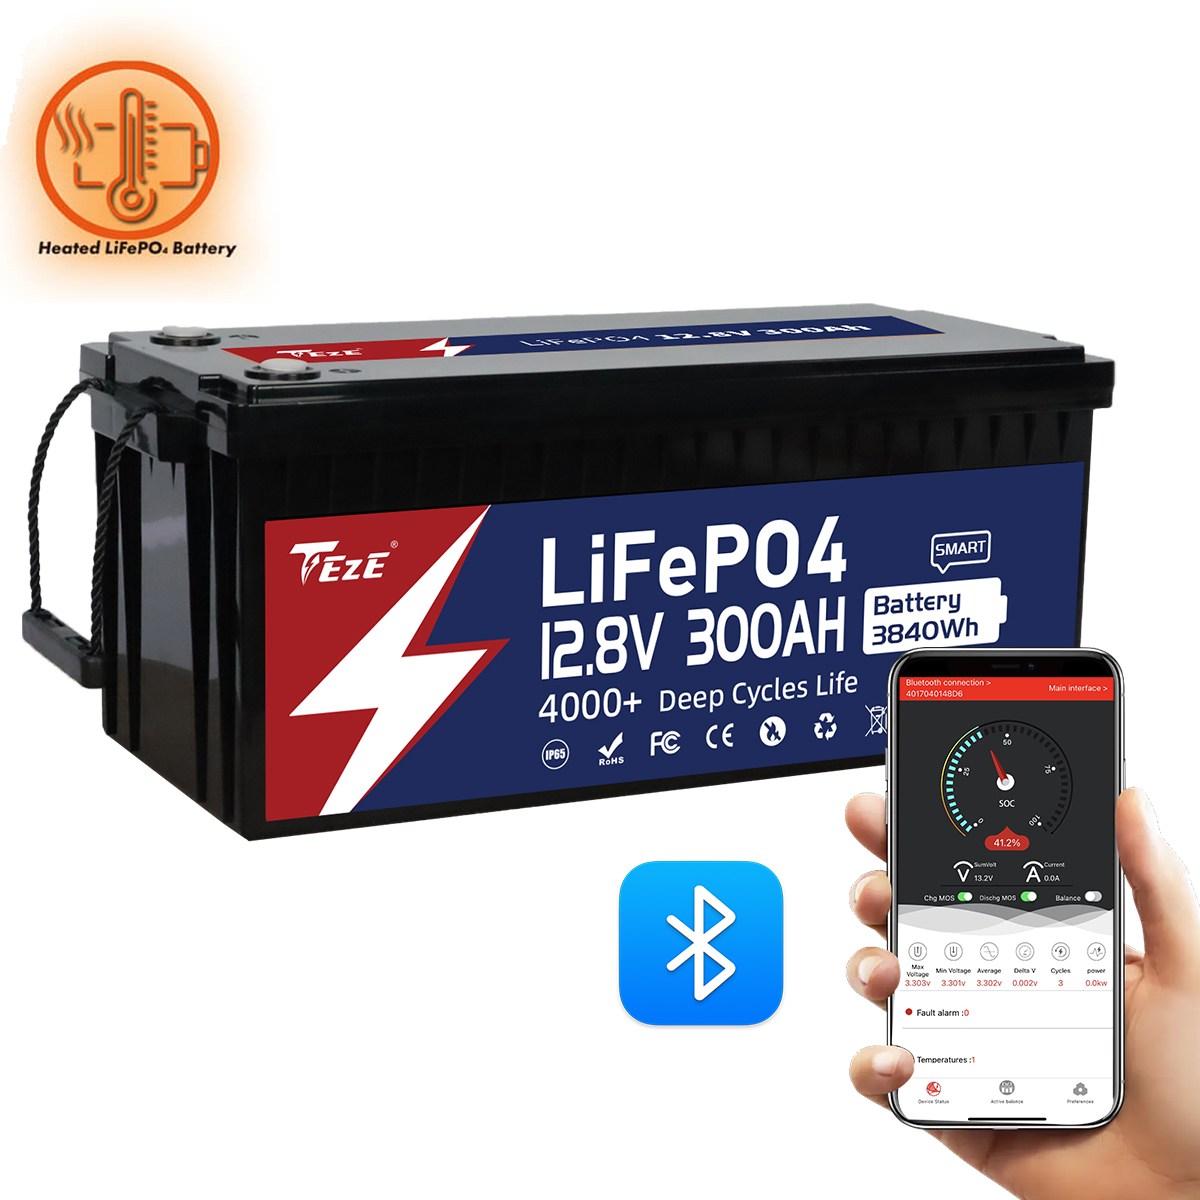 TezePower 12V 300Ah LiFePO4 Battery with RS485/RS232/CAN Communication Ports, Bluetooth, Self-heating and Active Balancer, Built-in 200A Daly BMS(Bluetooth Built-in Version)-TezePower